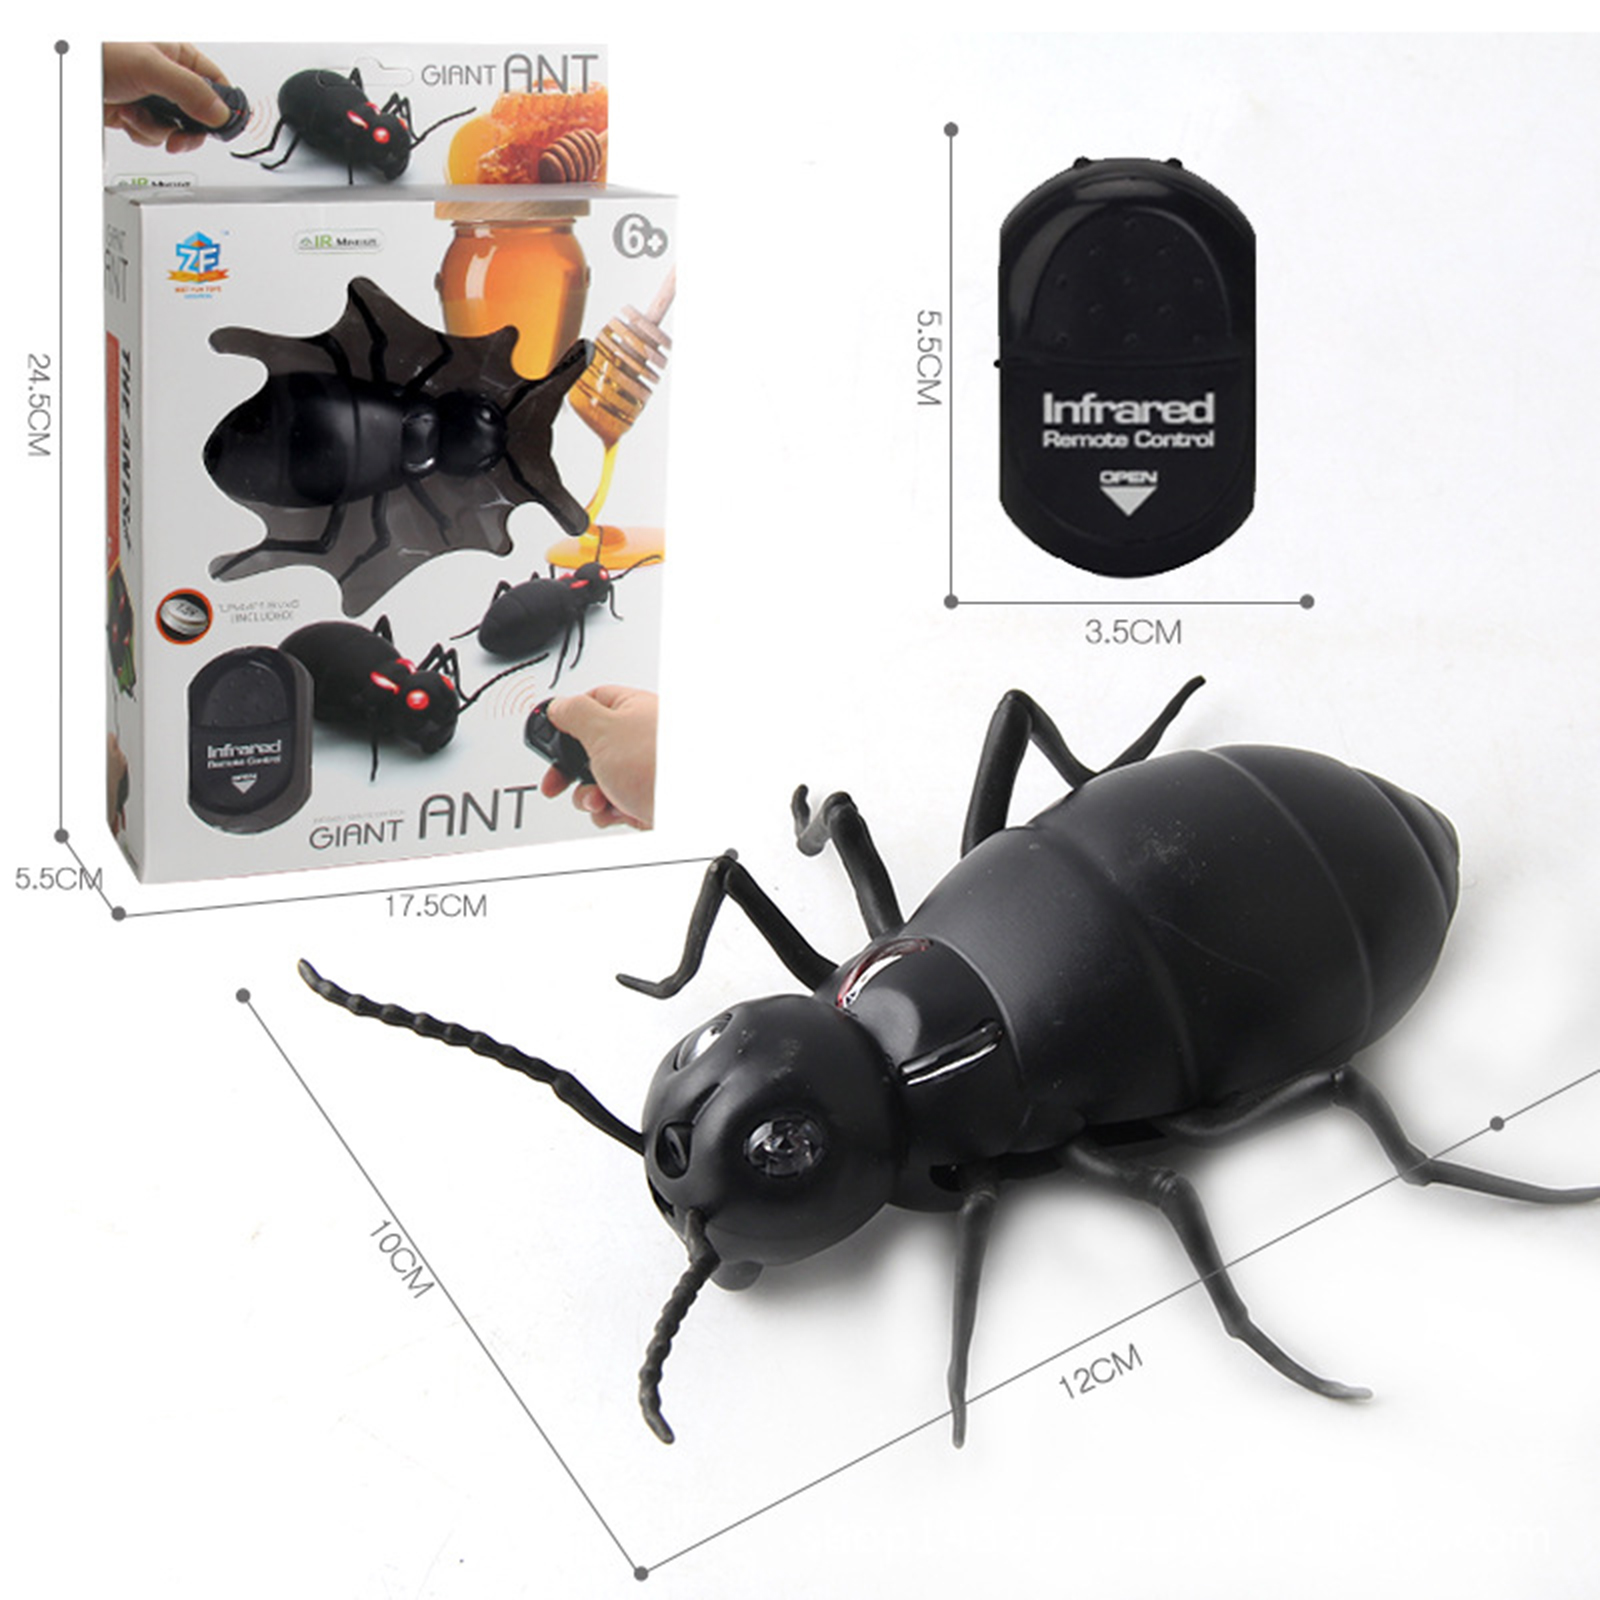 Infrared Remote Control Electric Cockroach Toys Simulation Induction Fake Cockroach Spider Ant Animal Tricky Props 9917 Ant 200g 0.28kg